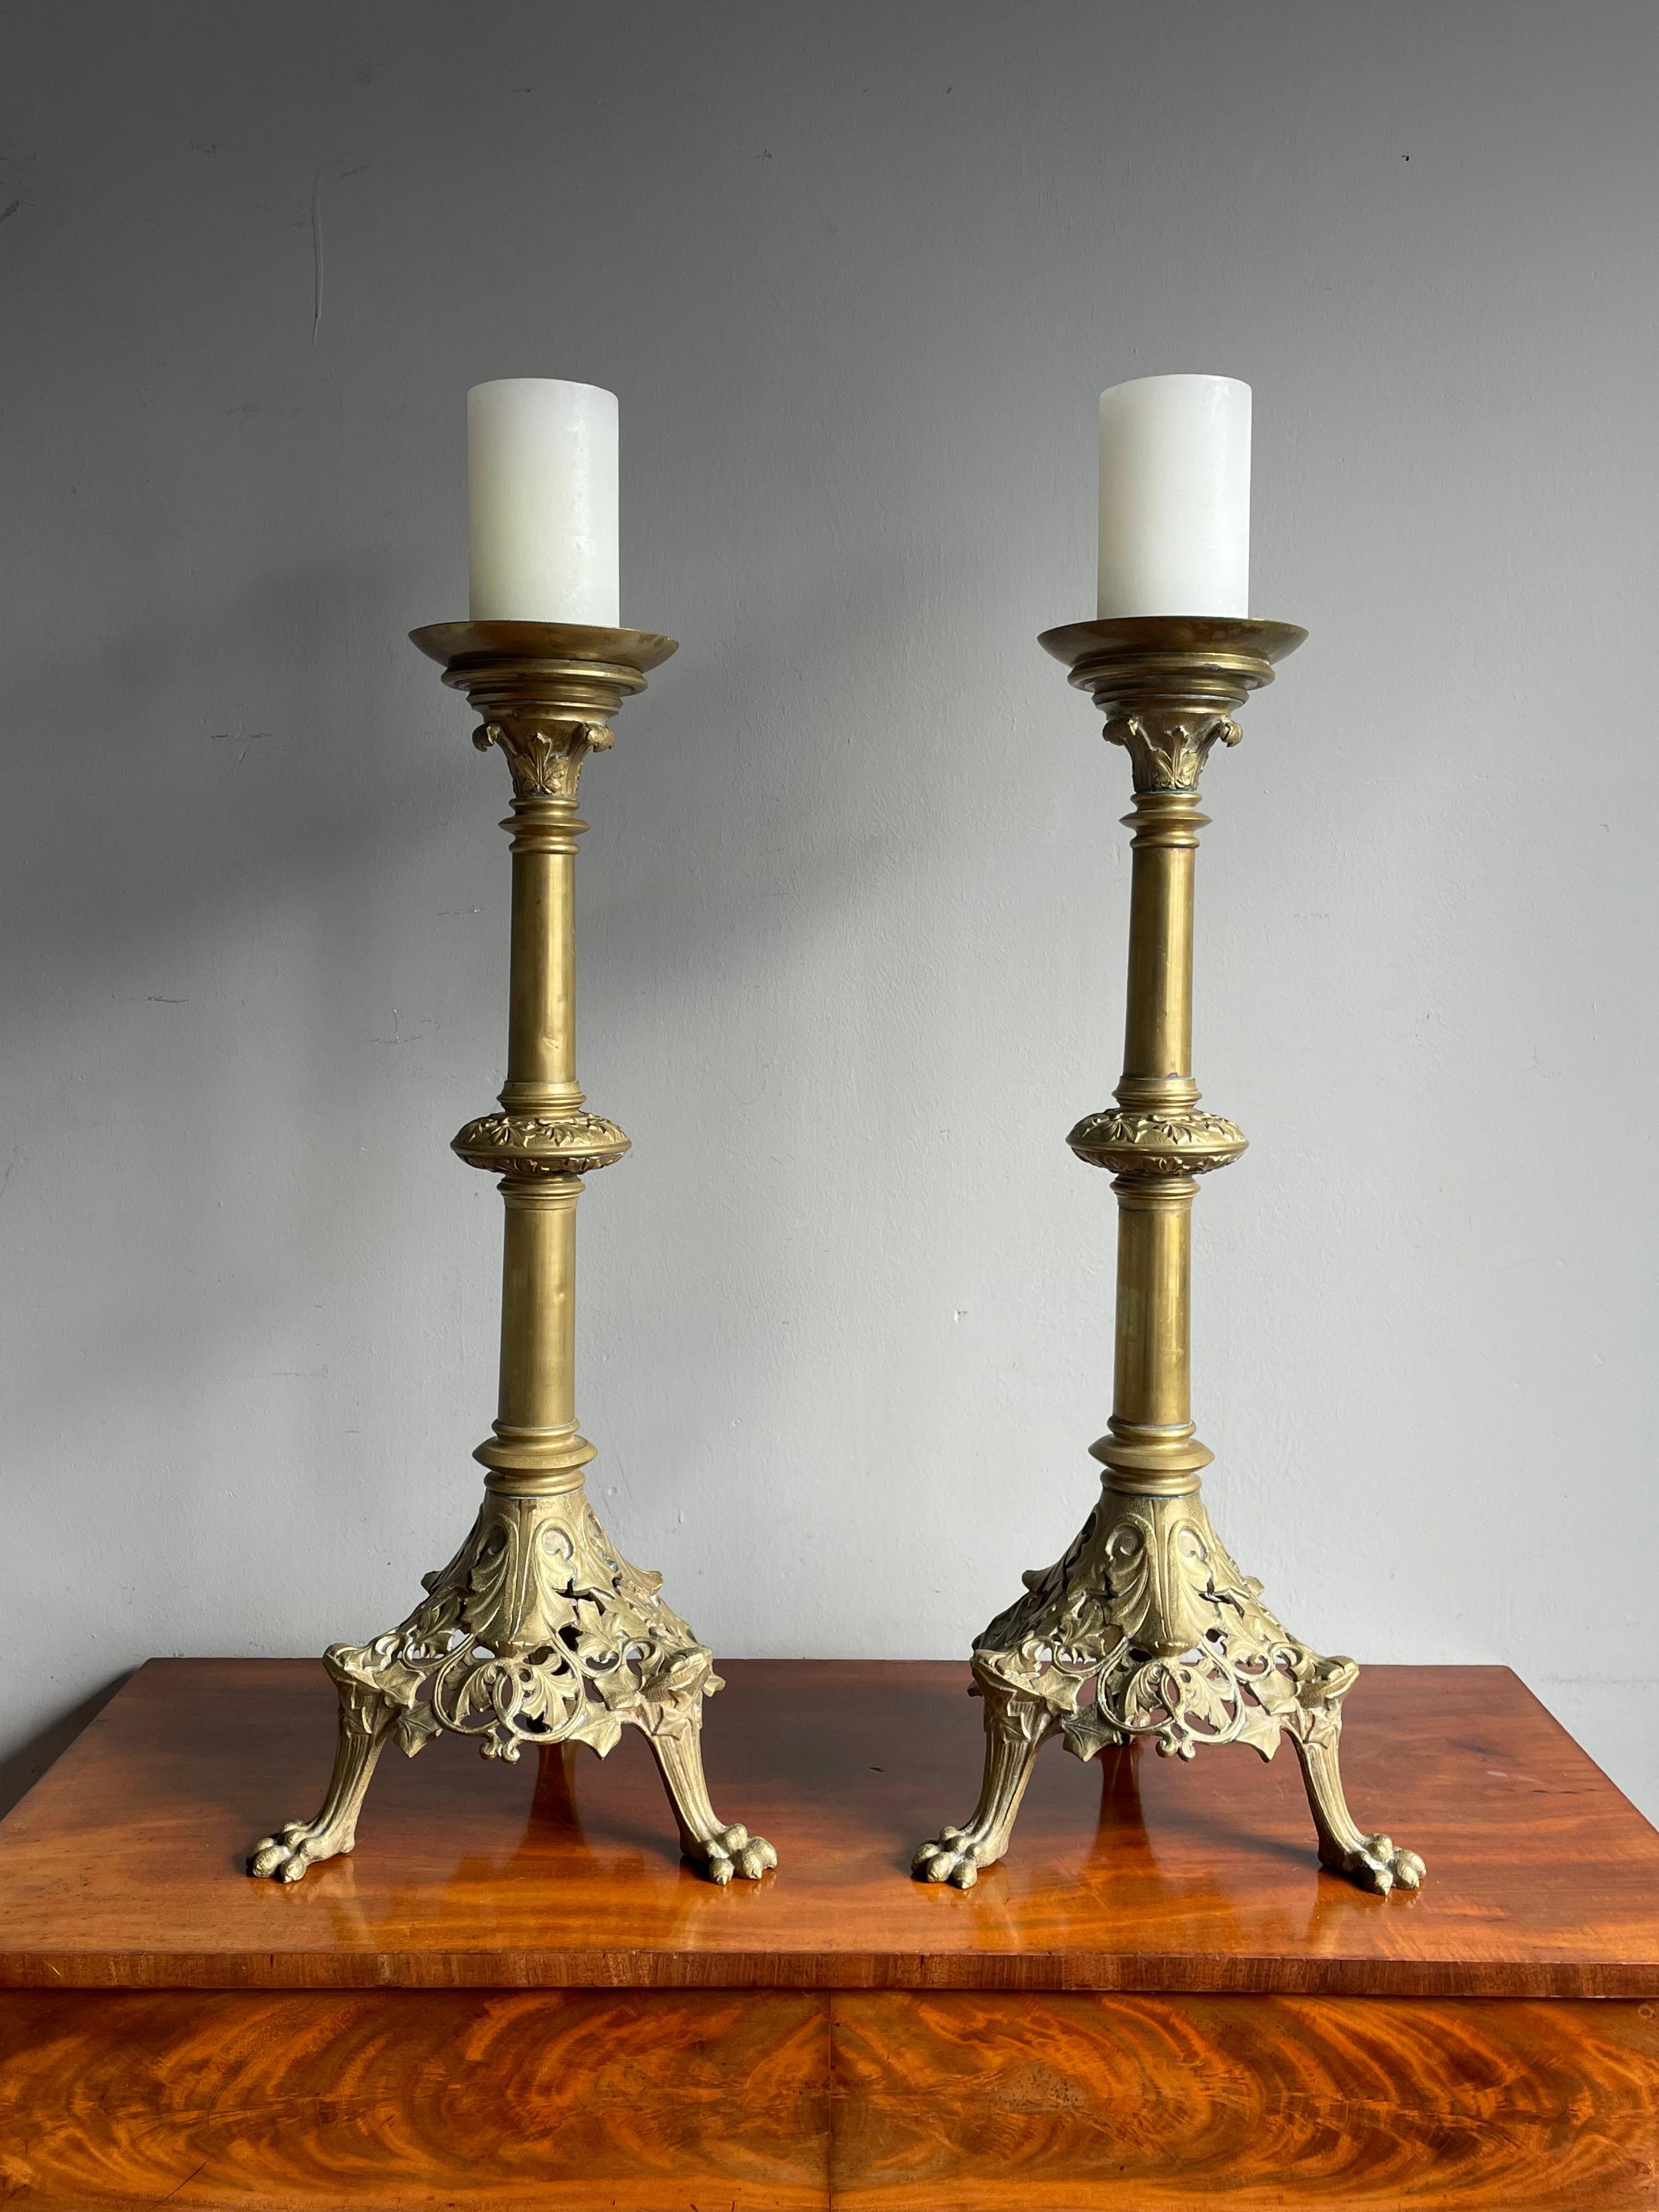 Antique Pair of Bronze Gothic Revival Church Altar Candlesticks / Candle Holders For Sale 13